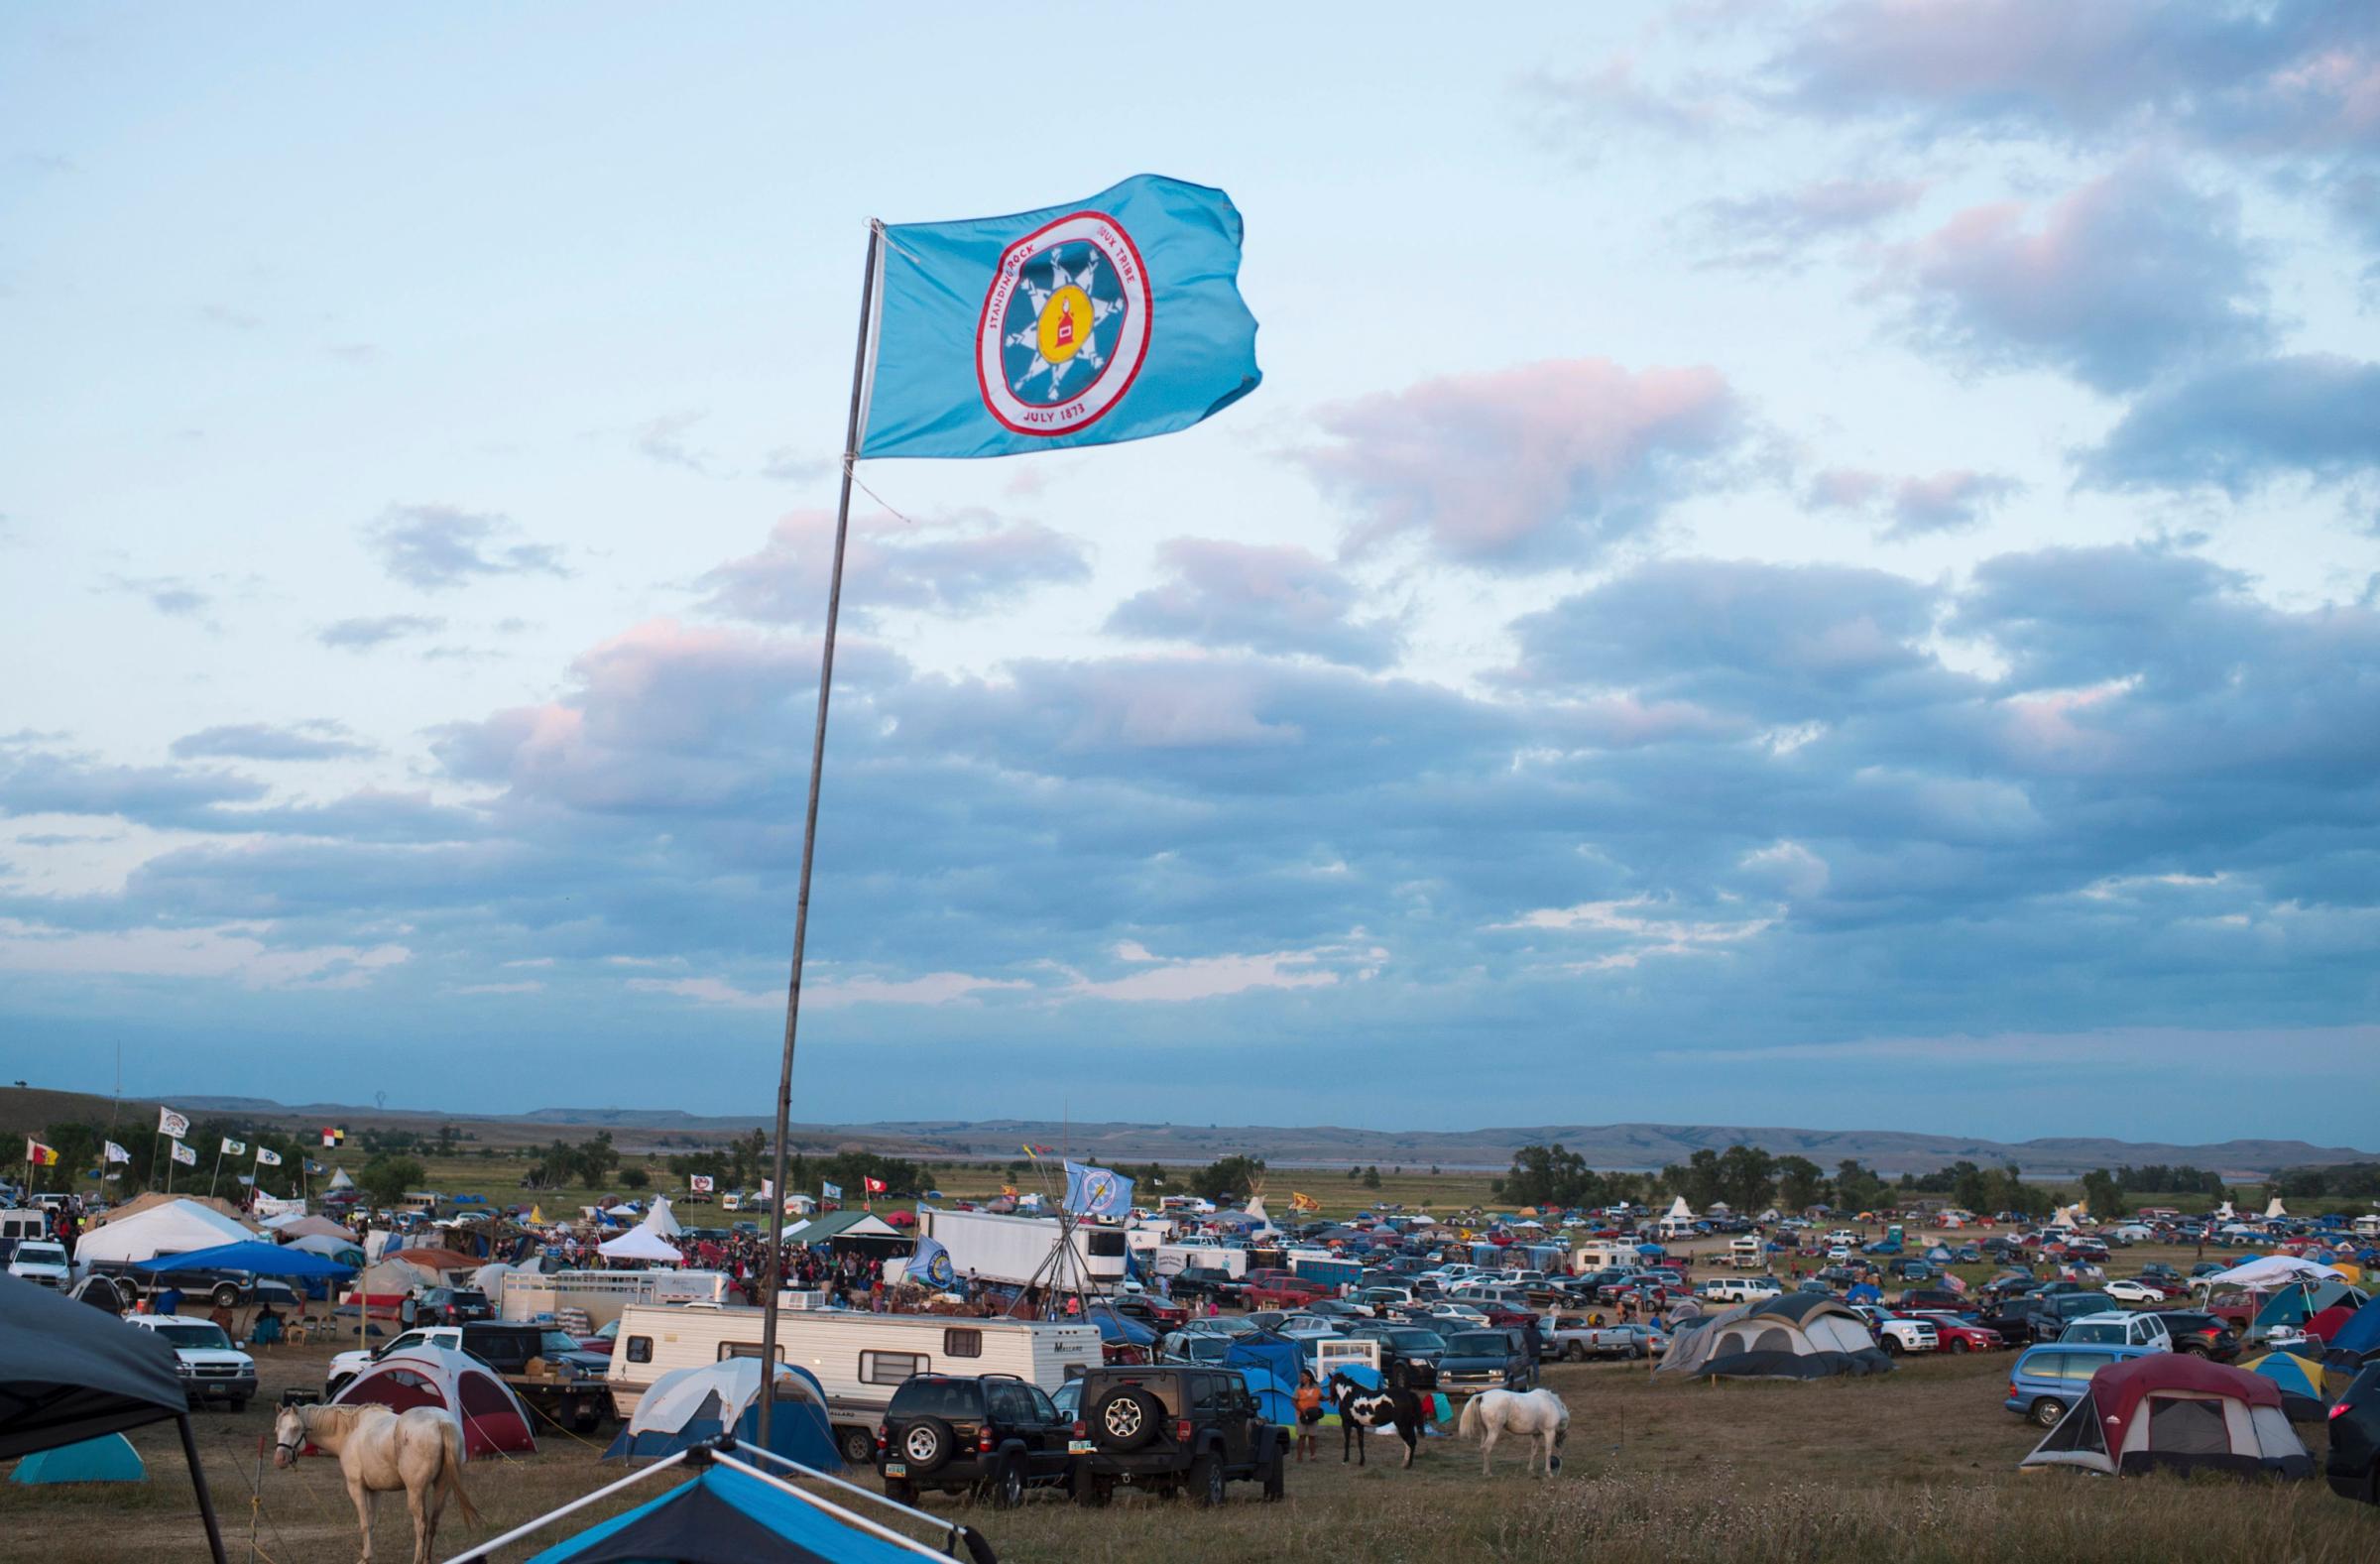 A Standing Rock Sioux flag flies over a protest encampment near Cannon Ball, North Dakota on Sept. 3, 2016.